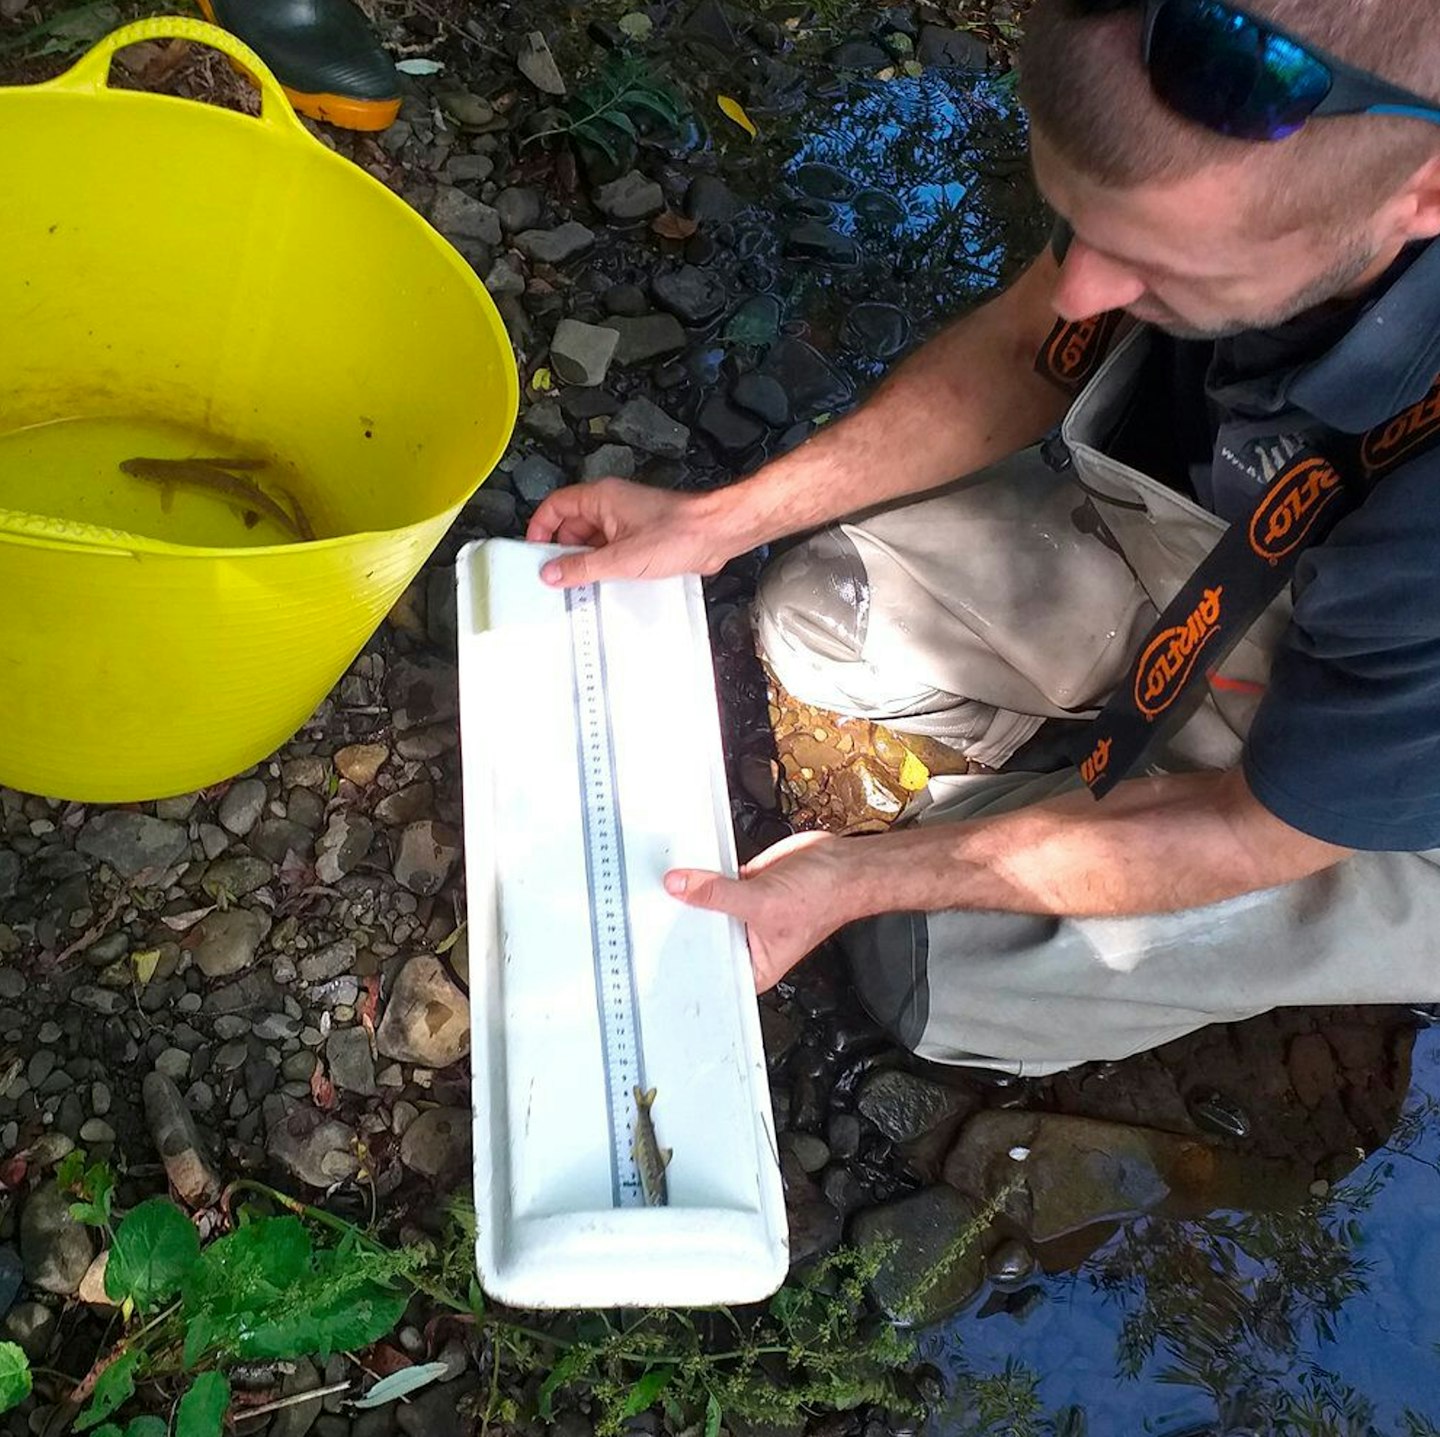 Juvenile salmon were measured and returned during the surveys